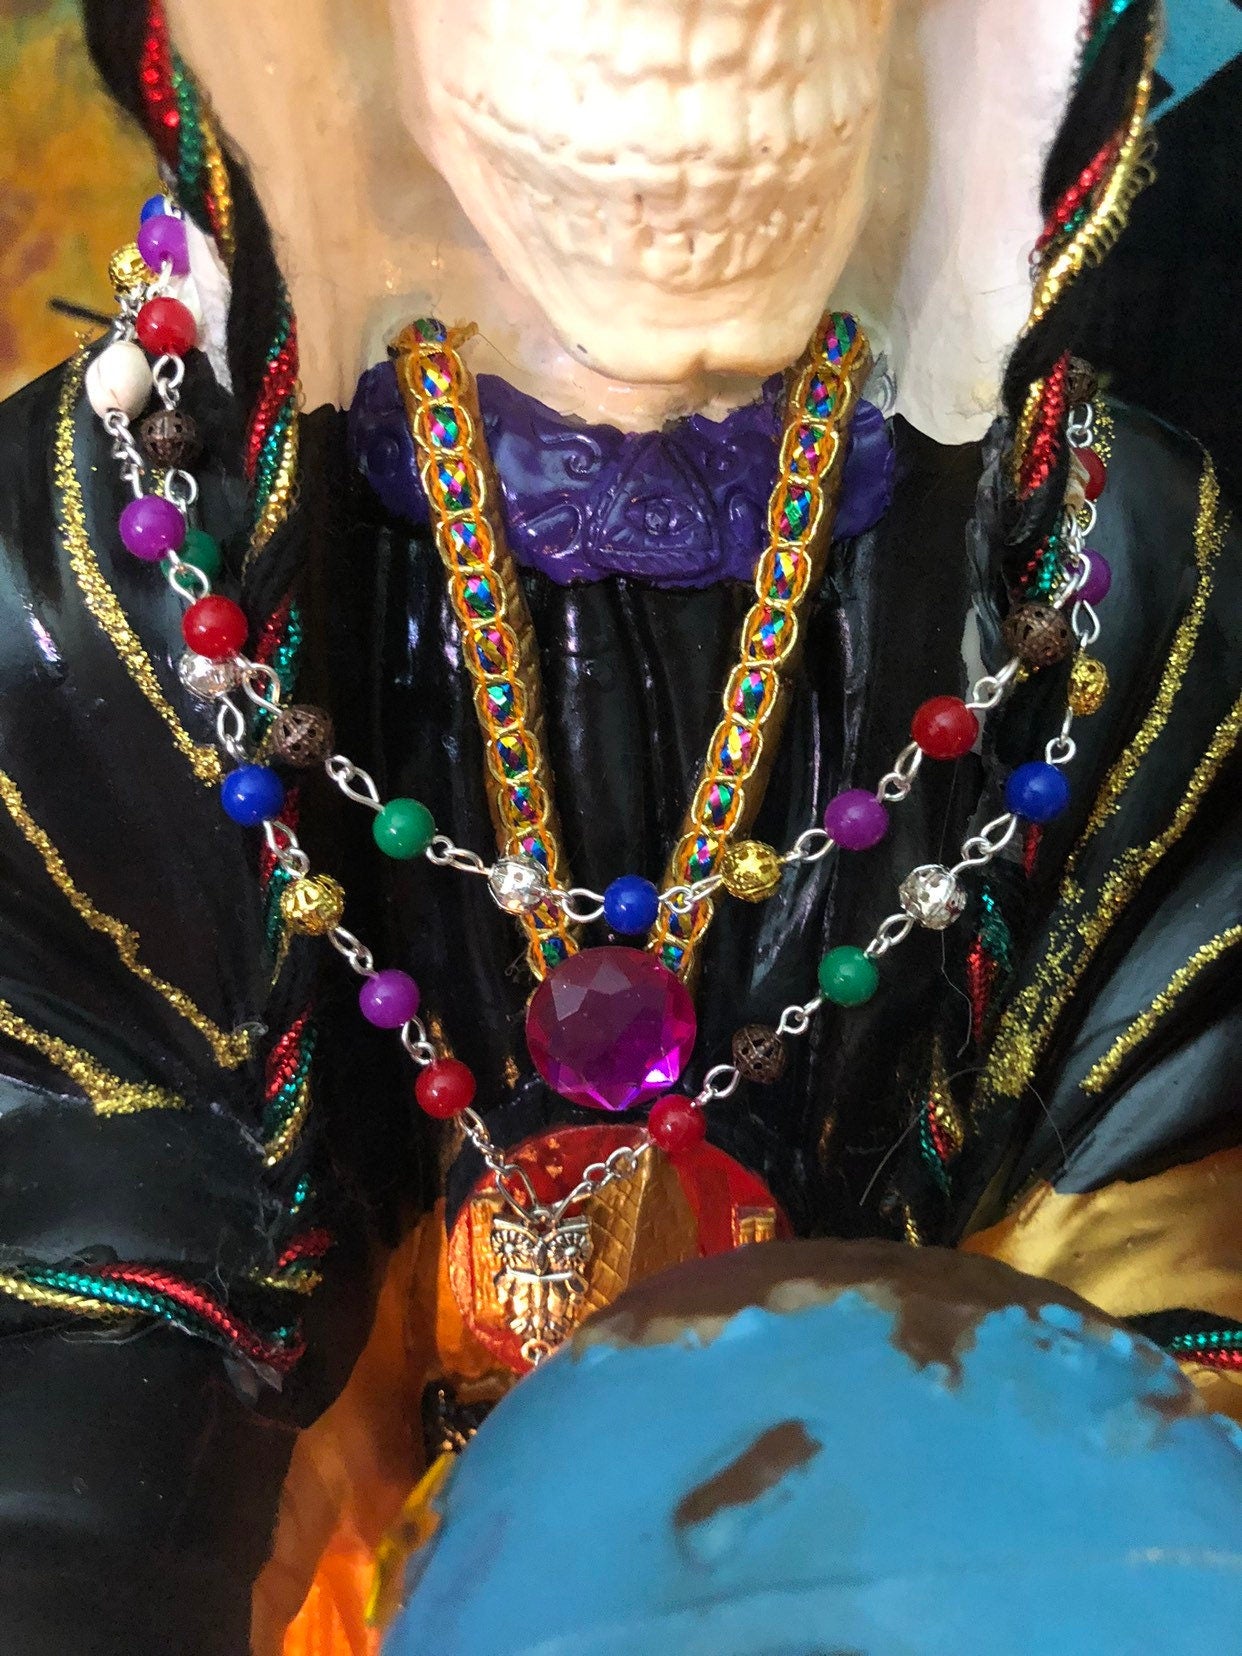 Santa Muerte Siete Colores Rosary + Sterling Silver Plated Chain + Handcrafted + Rosario